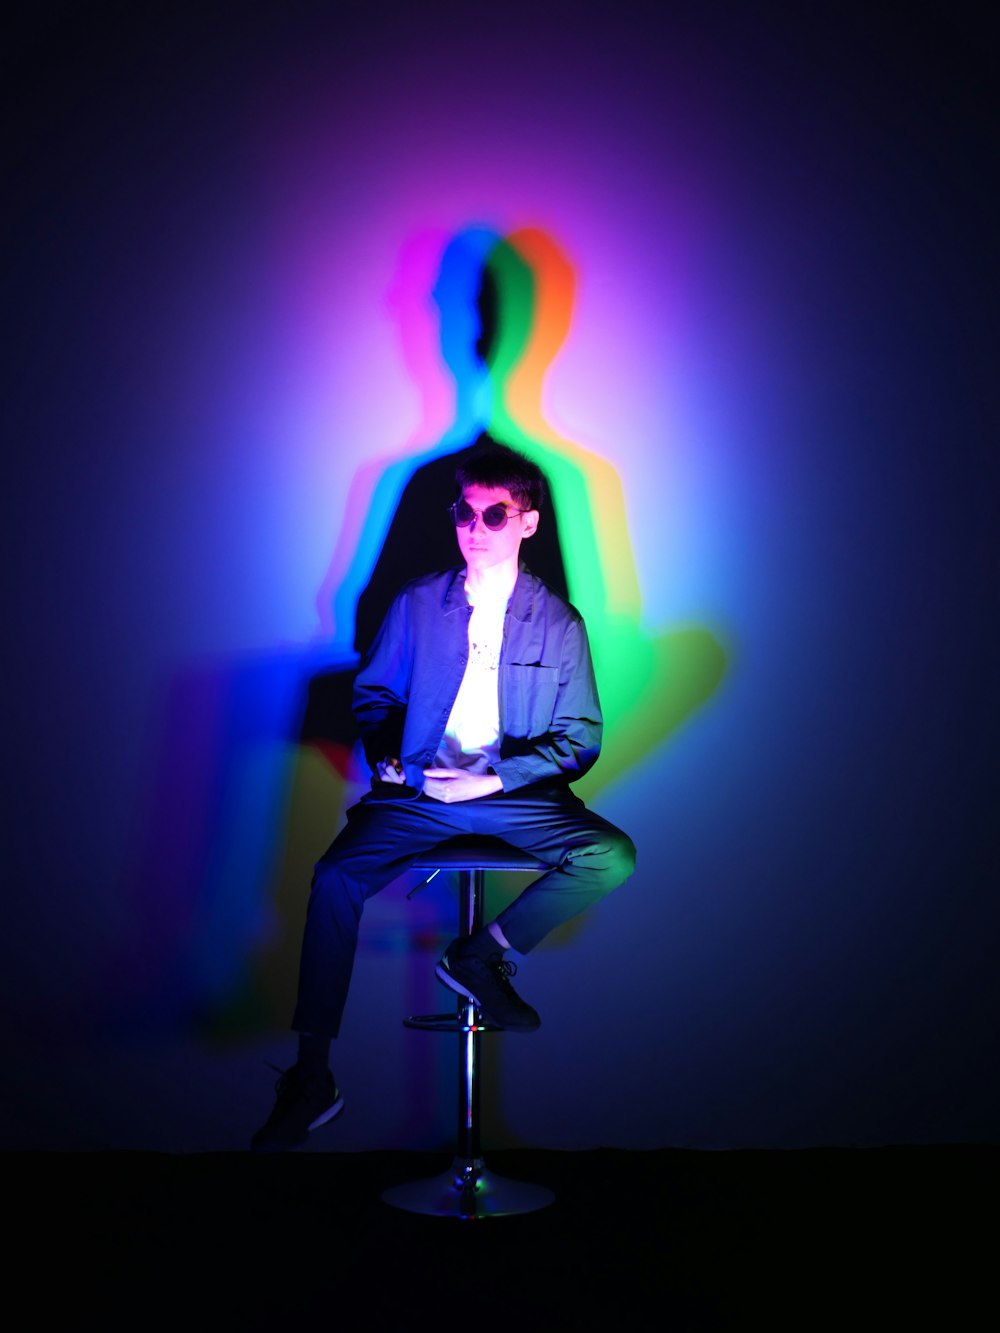 a man sitting on a stool in front of a colorful light